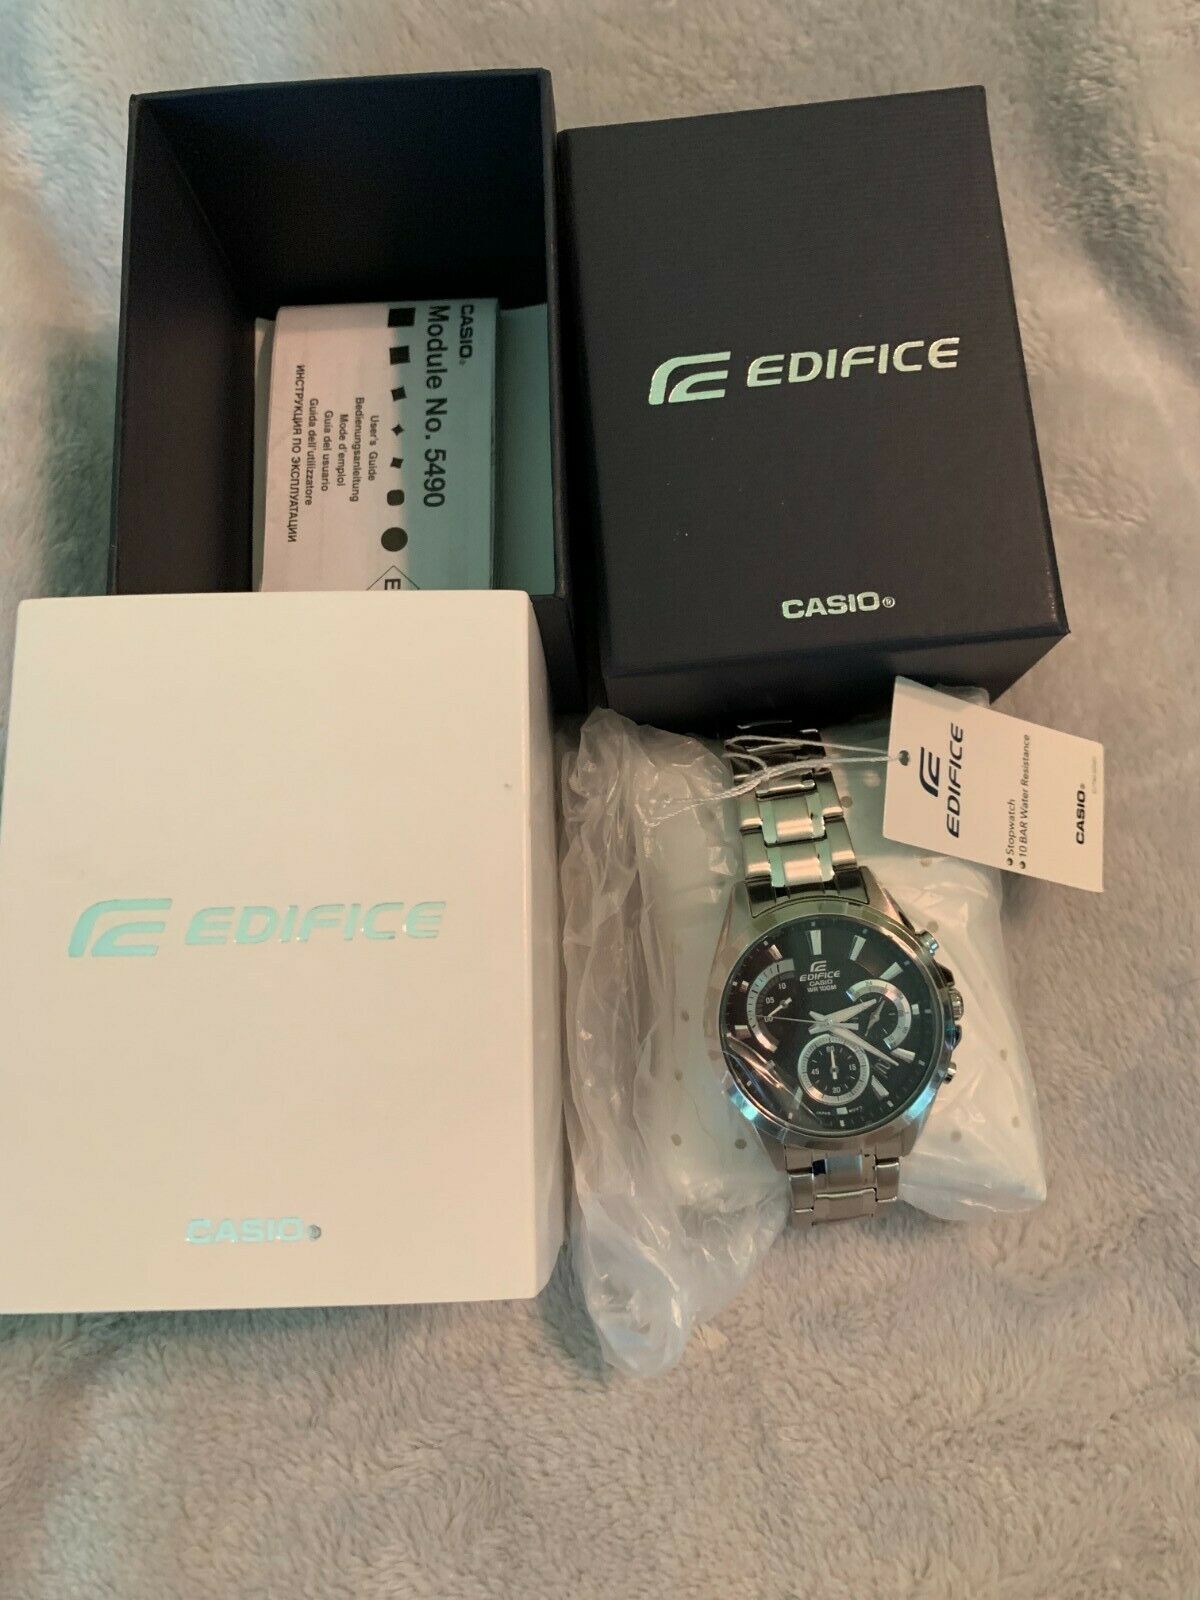 & NEW CASIO Watch, / BOX Steel TAGS | Model Stainless EFV-580D-1AVUEF with WatchCharts Silver